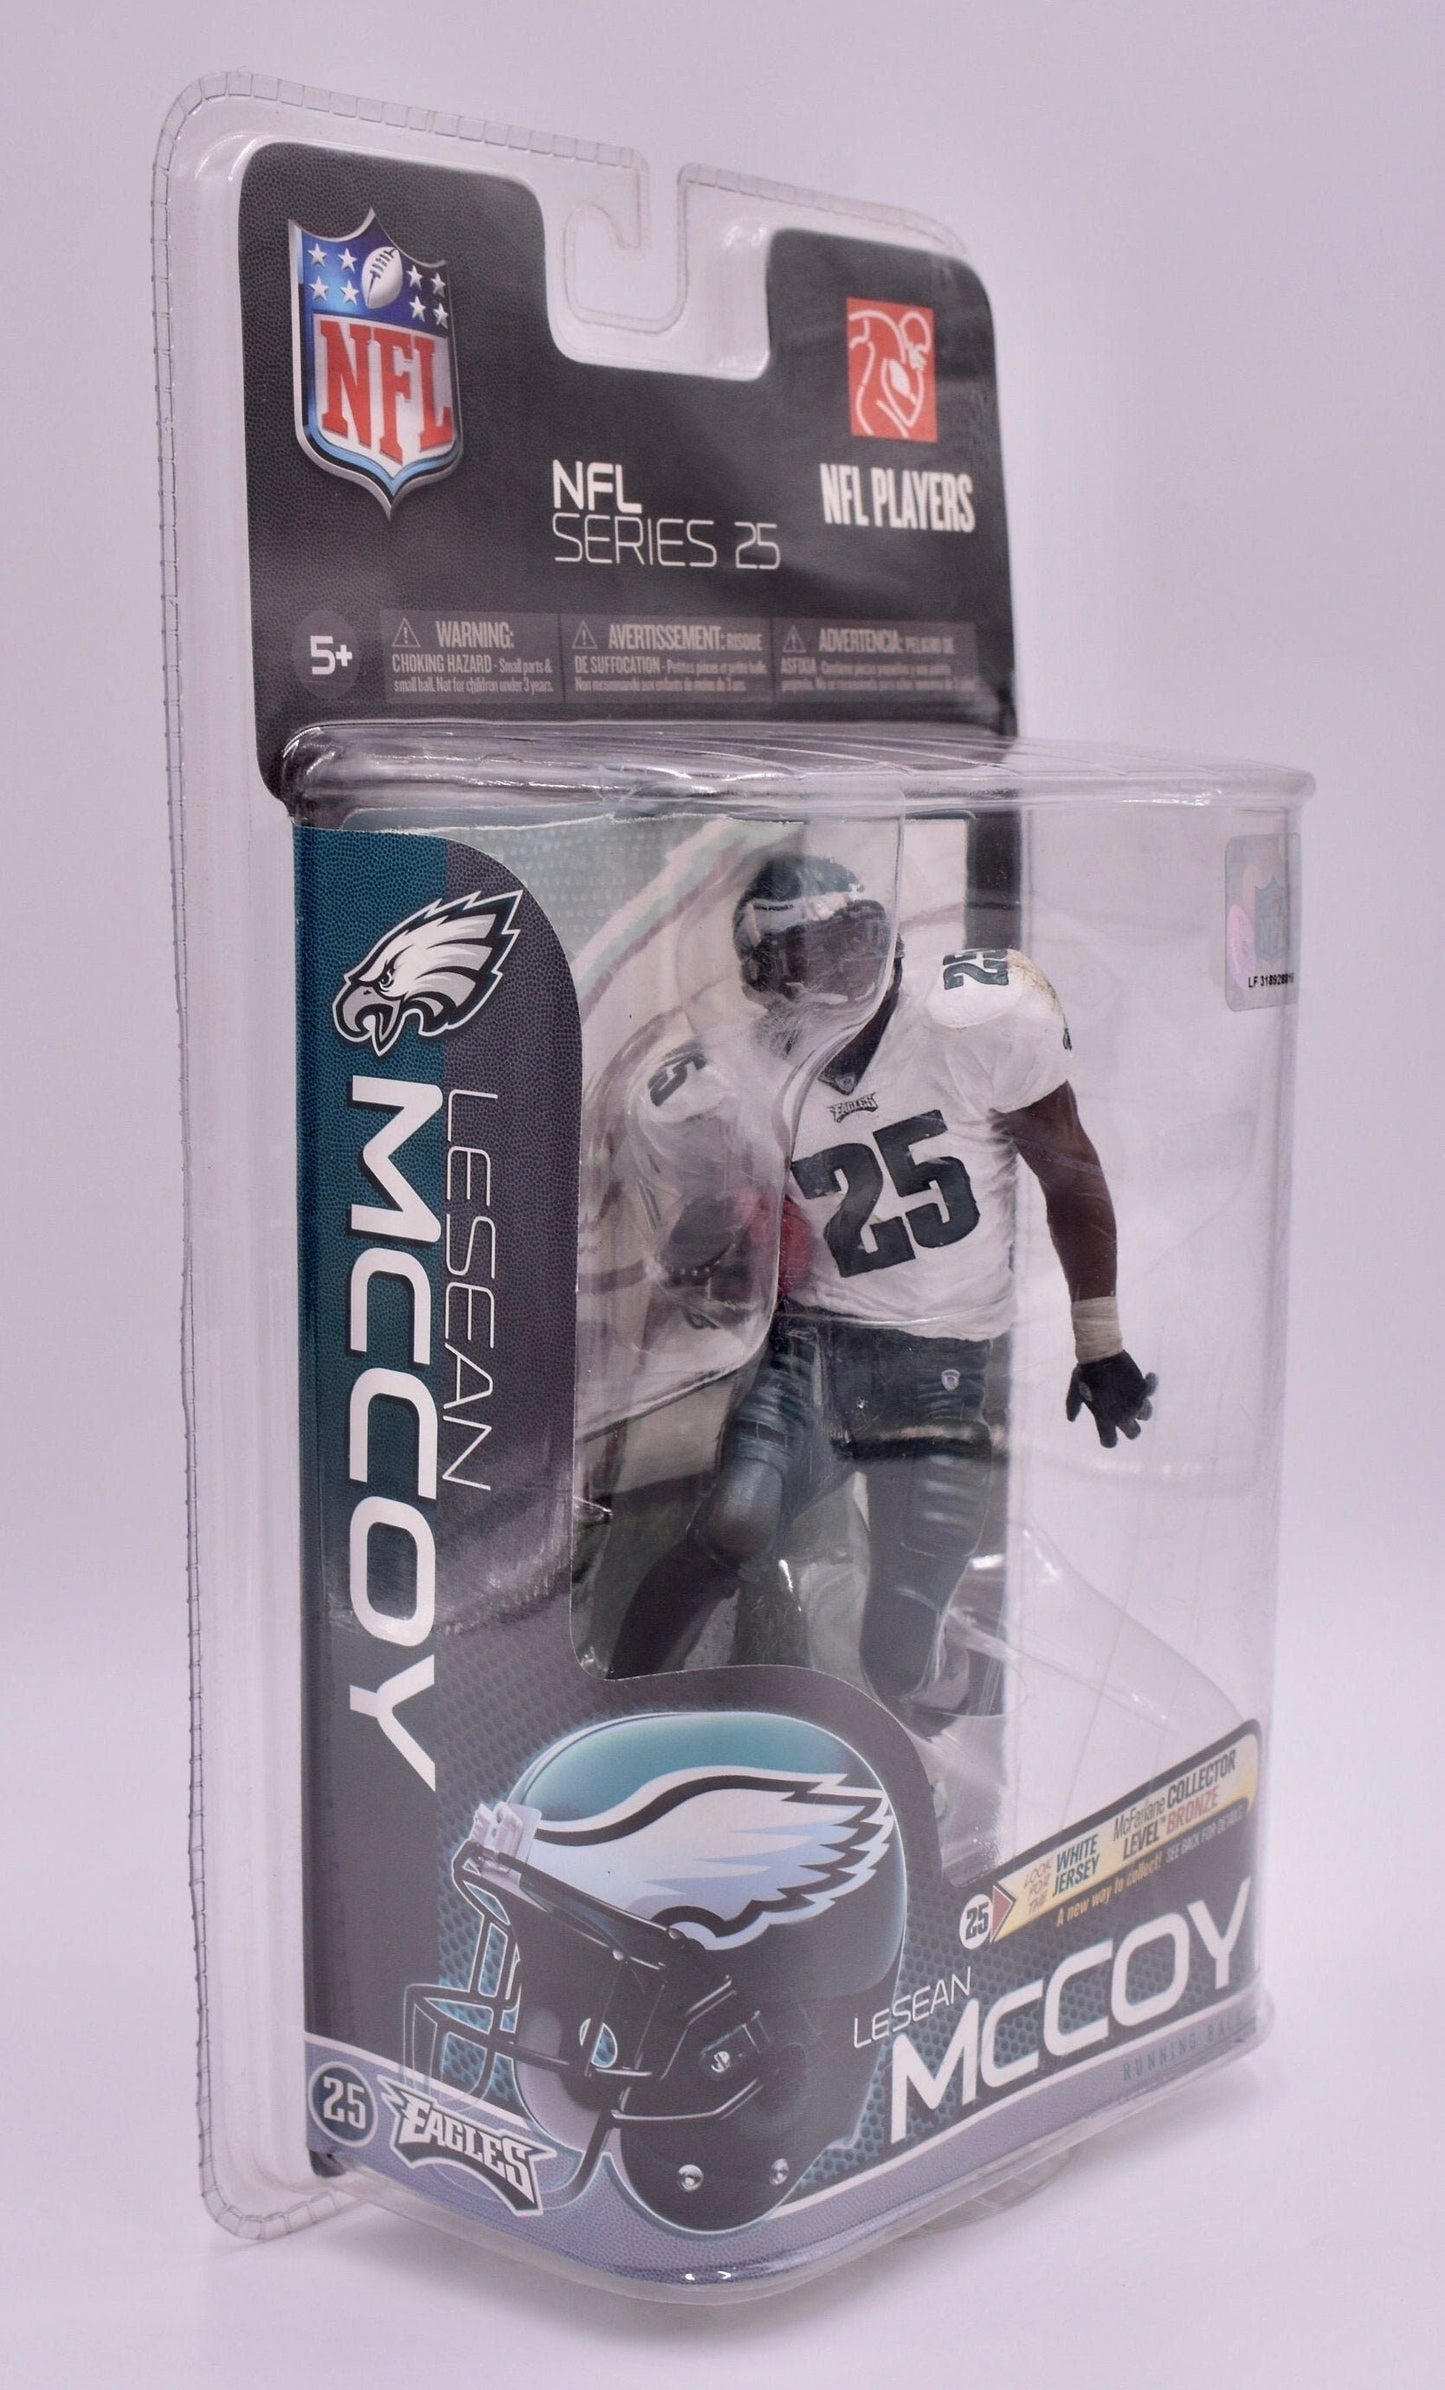 McFarlane LeSean McCoy Philadelphia Eagles White and Green Collectable NFL Action Figure Vintage Football Figurine Perfect Birthday Gift